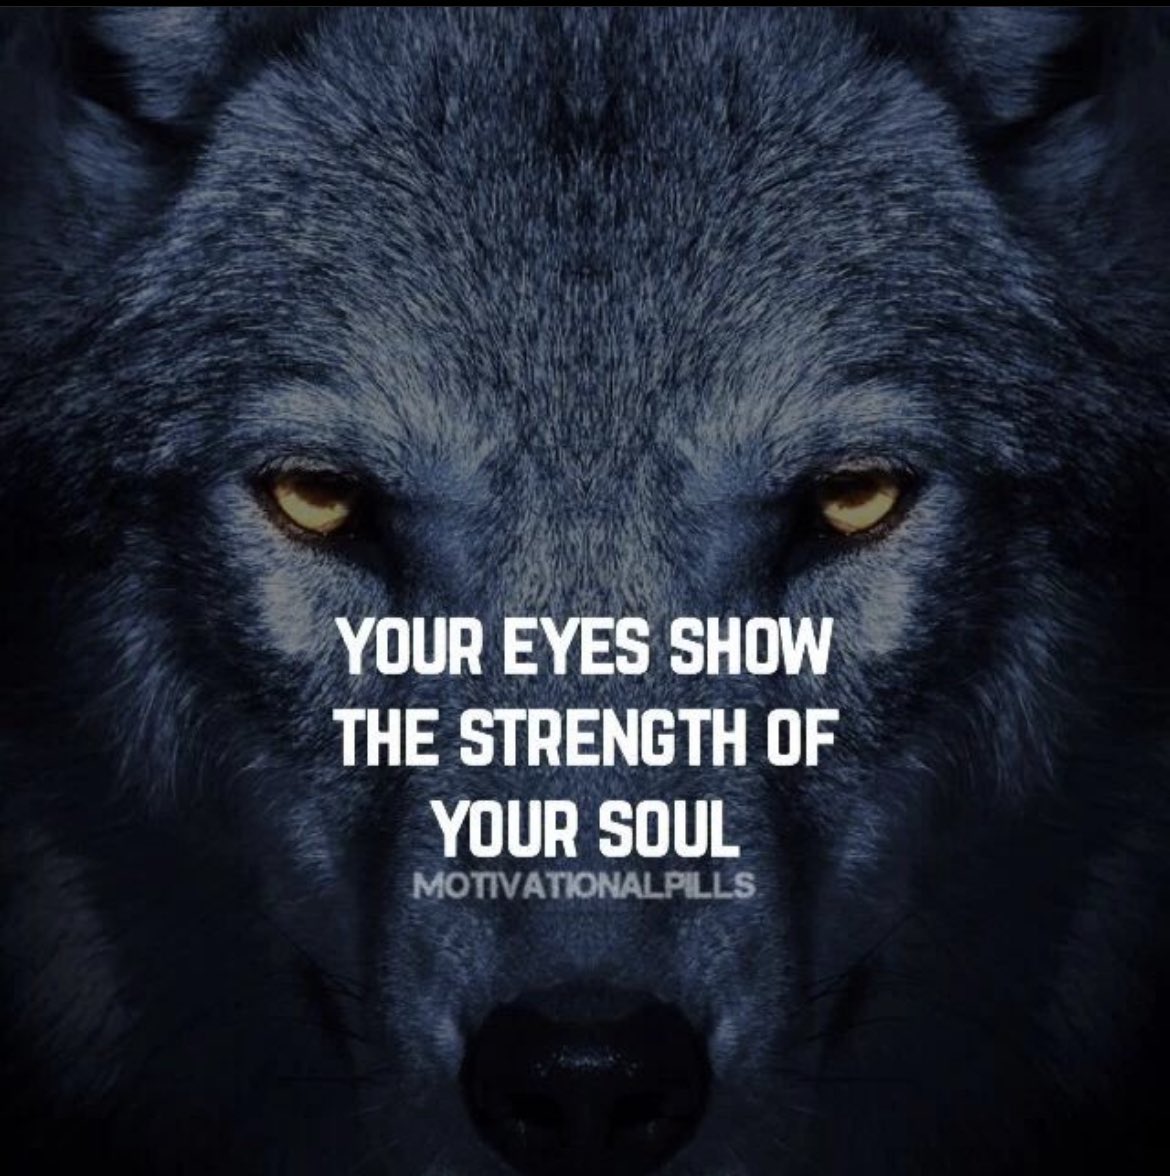 Your Eyes. #FridayMotivation #thoughtoftheday #quoteoftheday #quotetoliveby #wolfquotes #wolfeyes #wolfmoon #wolfpack #motivational #inspirational #soulquotes #strength #bestrong